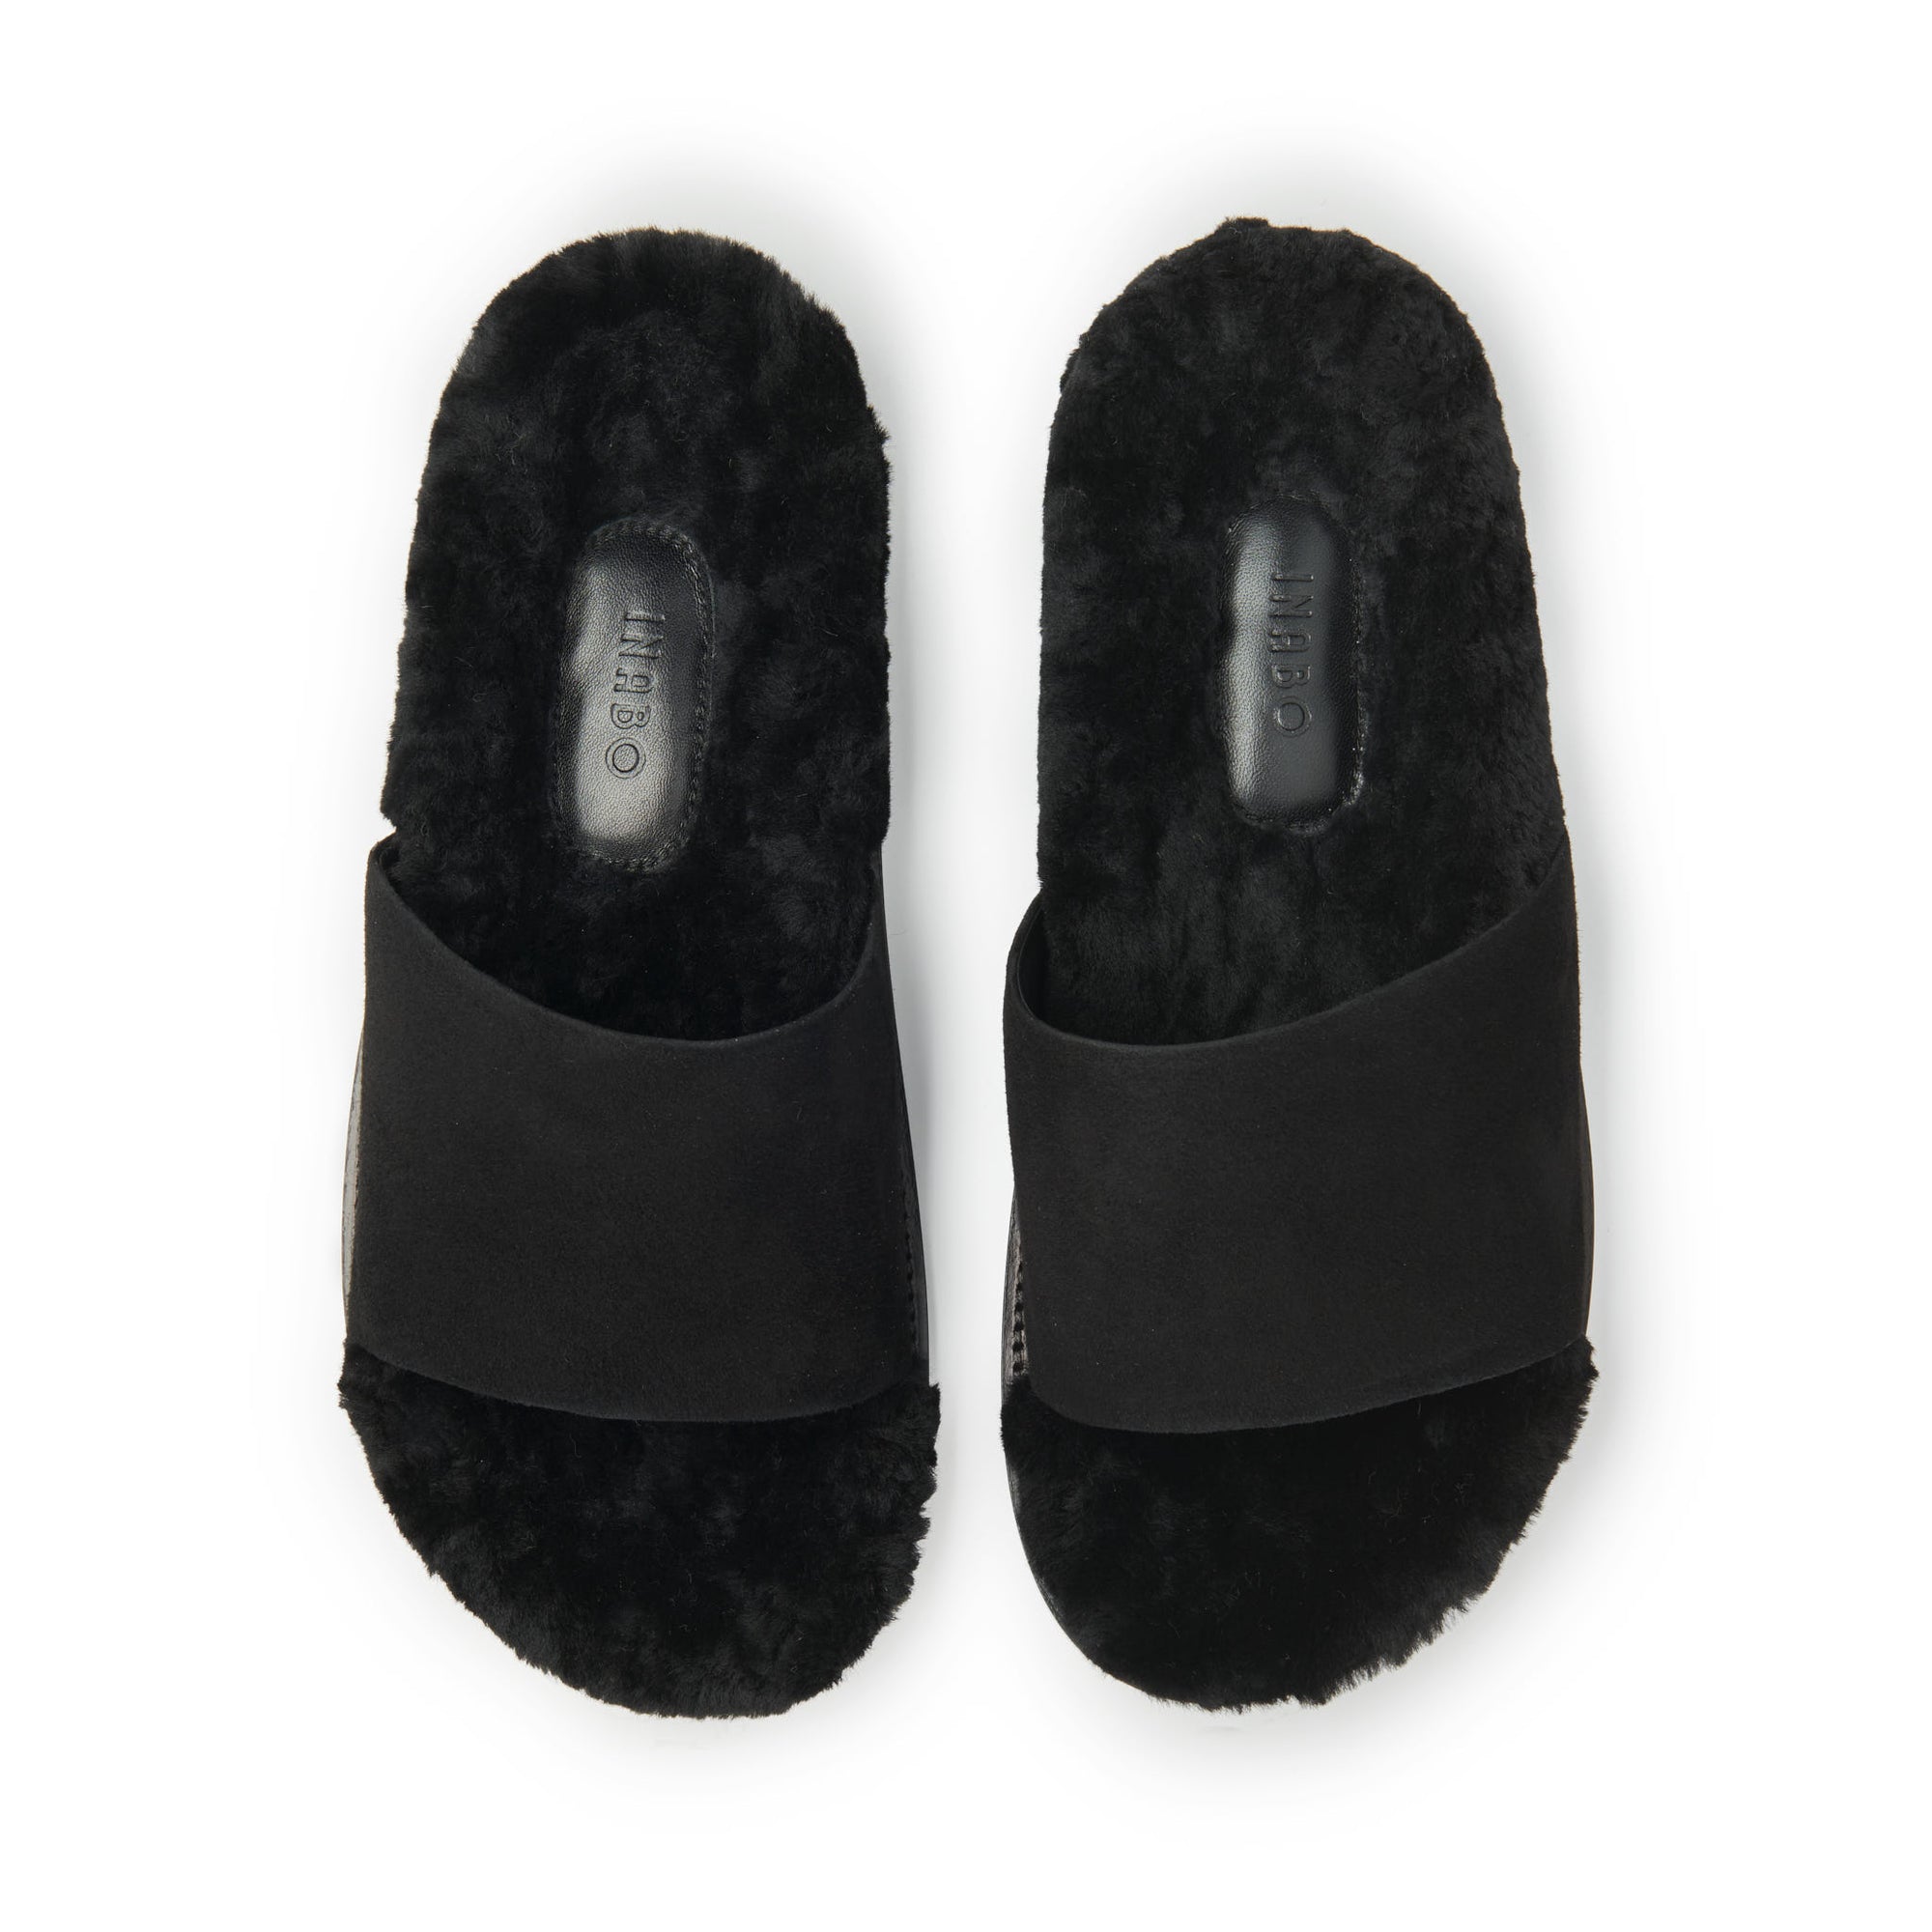 Inabo Women's Slipper in black suede and shearling with an open-toe shown from above